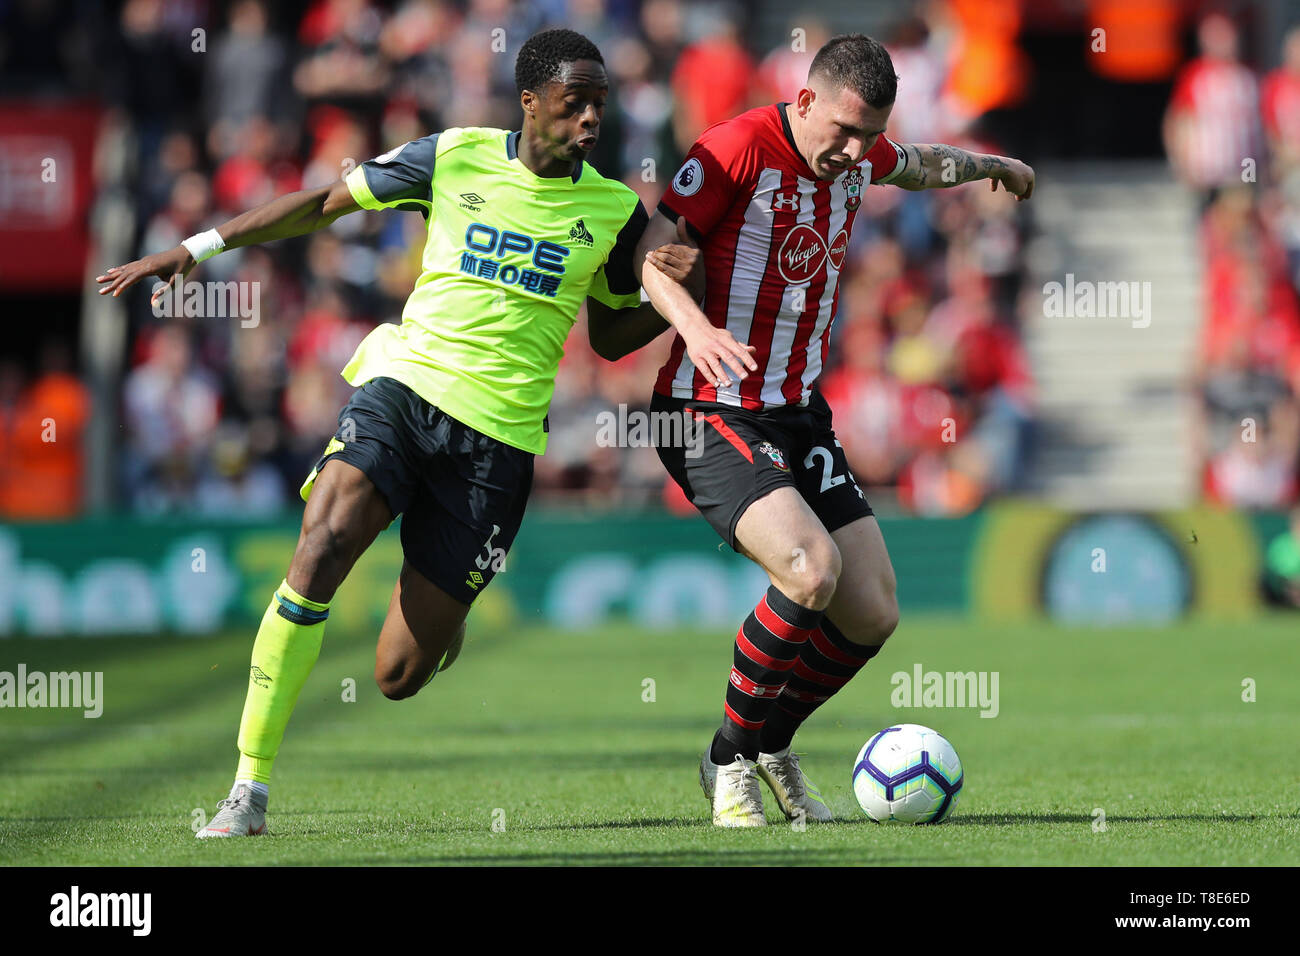 Southampton, UK. 12th May, 2019. Huddersfield Town defender Terence Kongolo  puts pressure on Southampton midfielder Pierre-Emile Hojbjerg during the  Premier League match between Southampton and Huddersfield Town at St Mary's  Stadium, Southampton